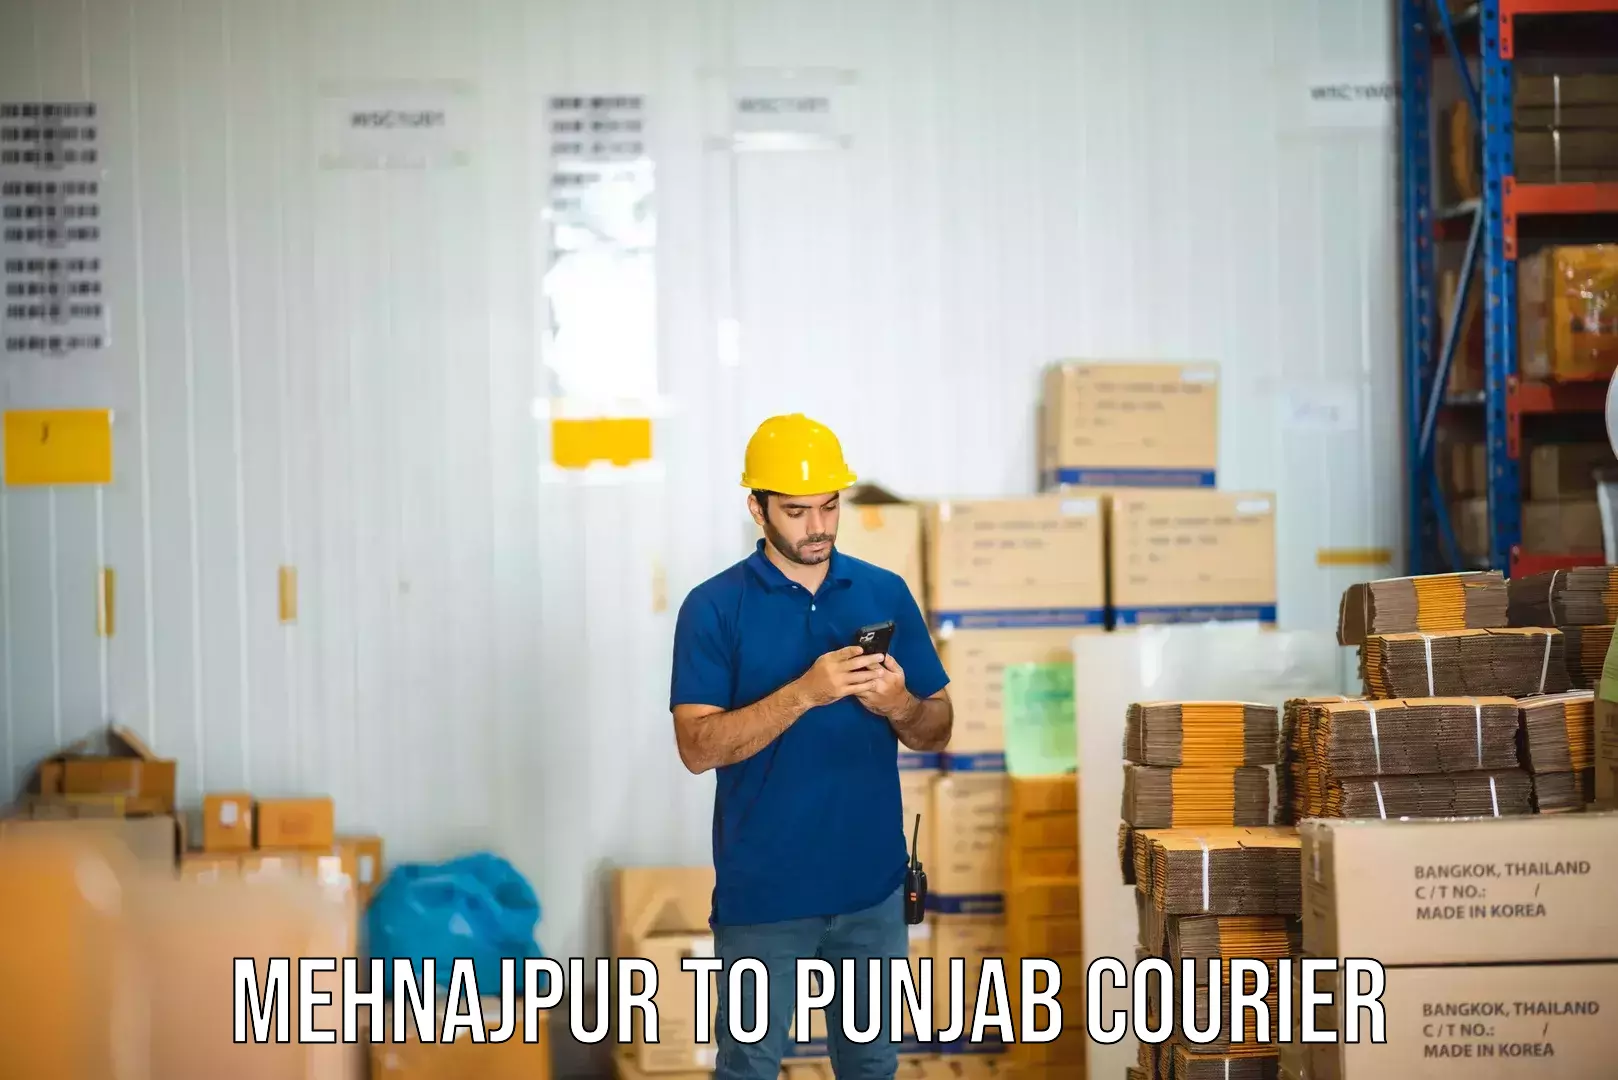 Advanced delivery network Mehnajpur to Punjab